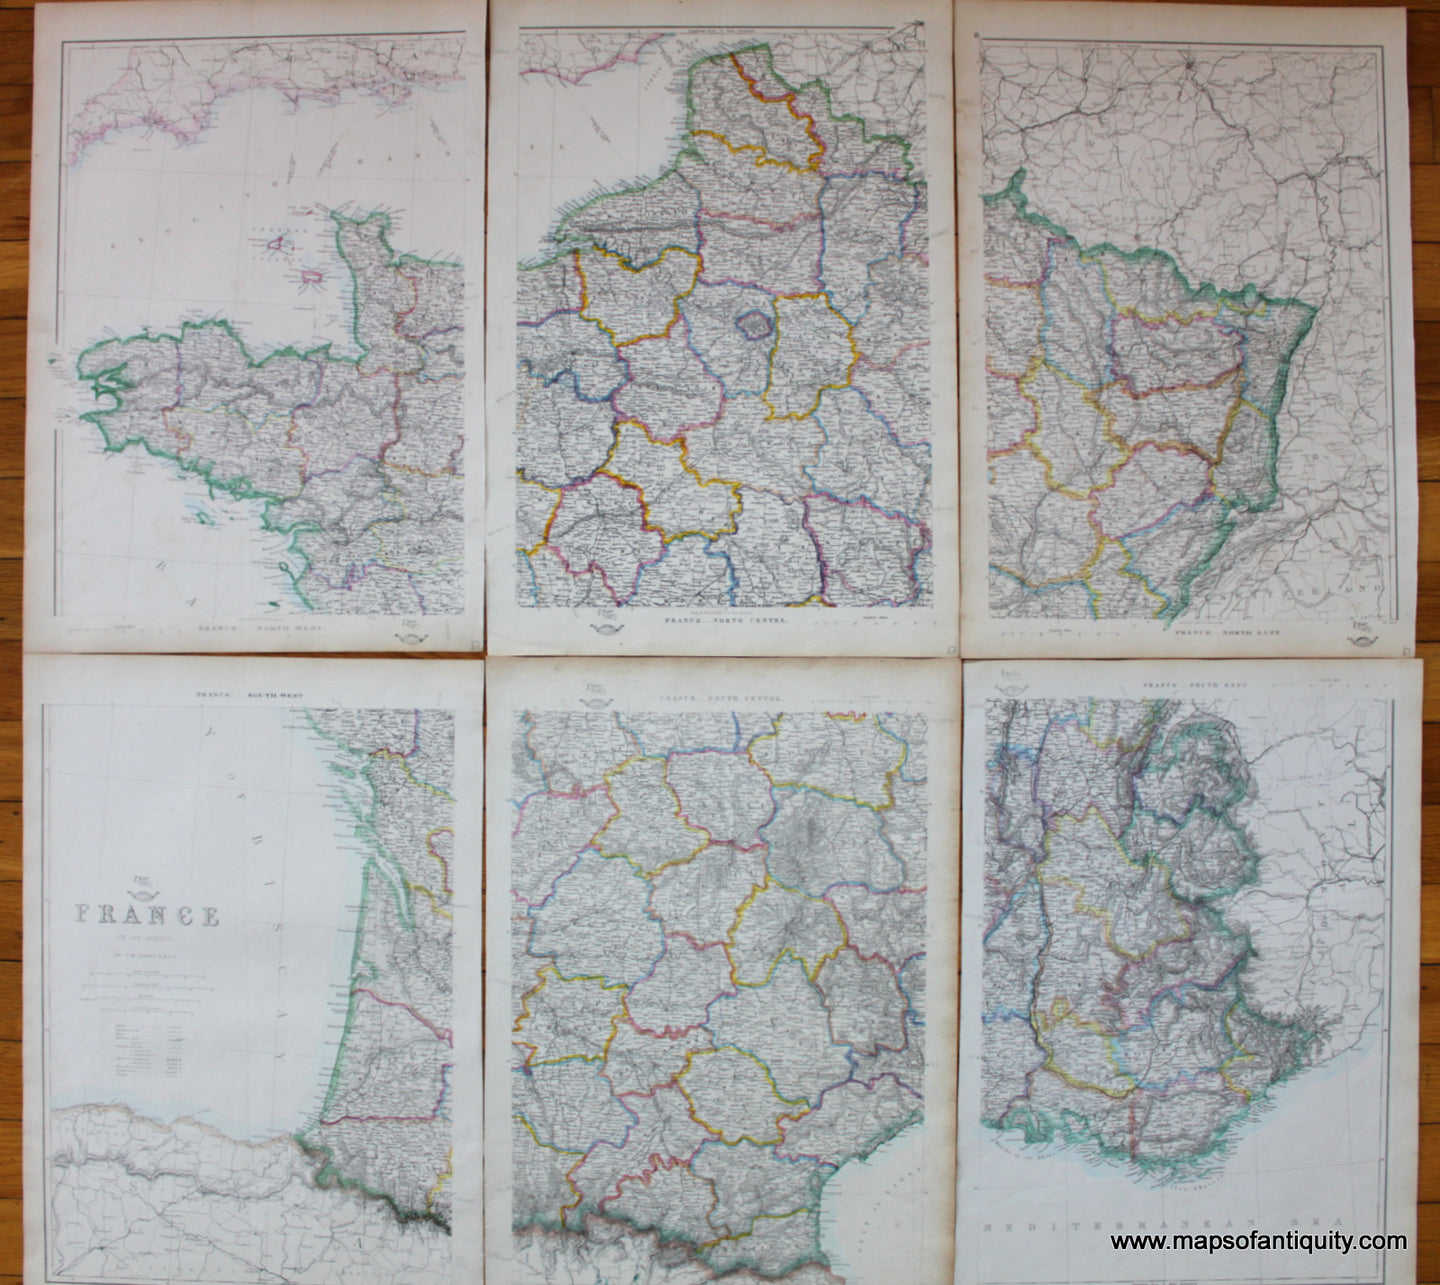 Antique-Map-France-Lowry-Weekly-Dispatch-6-six-sheets-1863-1860s-1800s-19th-century-Maps-of-Antiquity